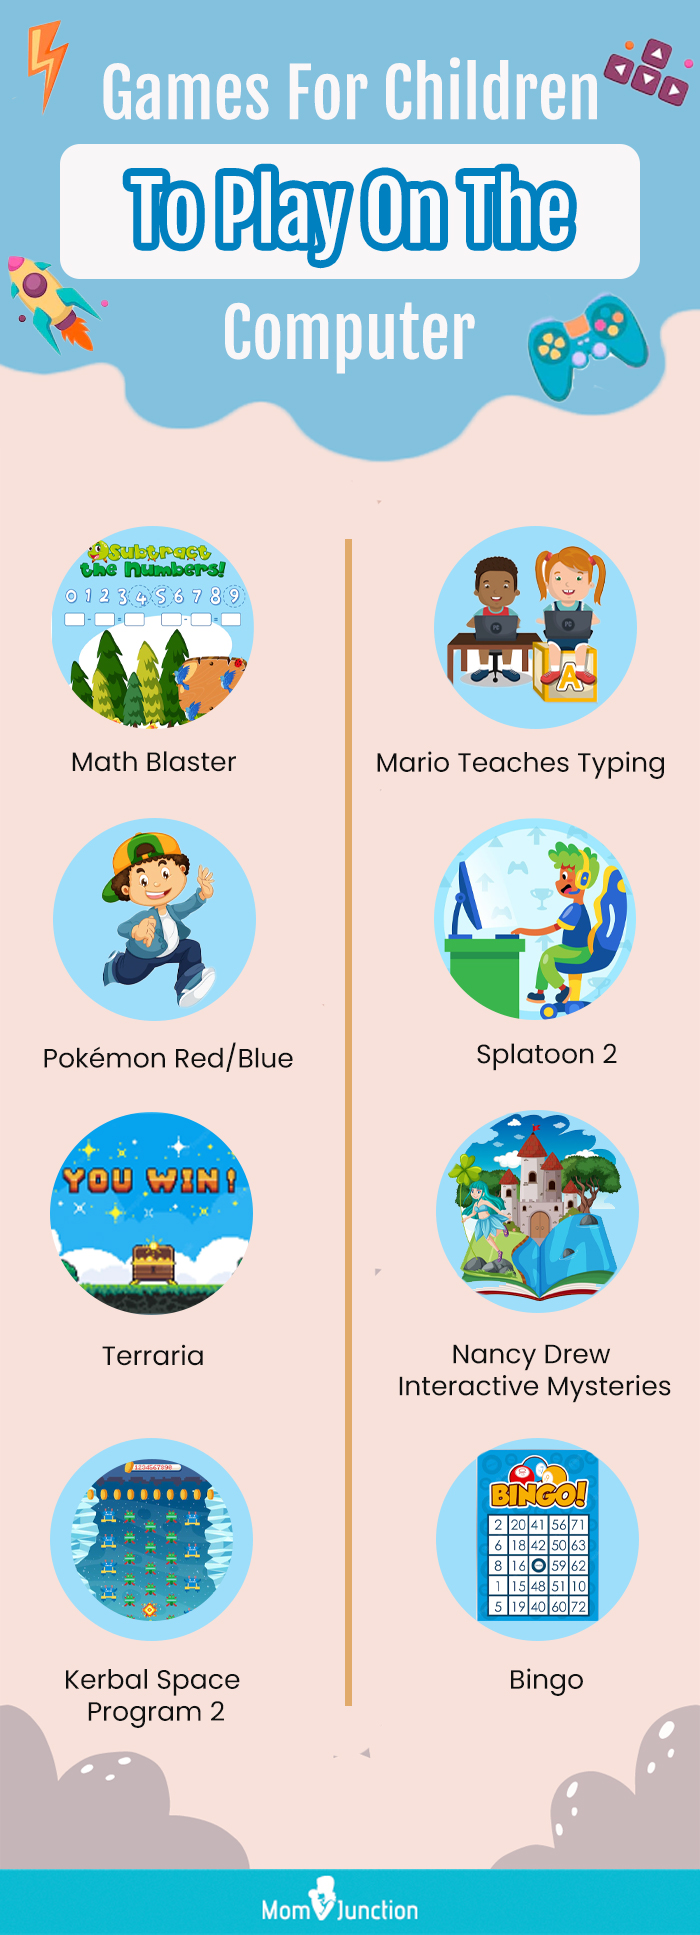 computers games for kids [infographic]